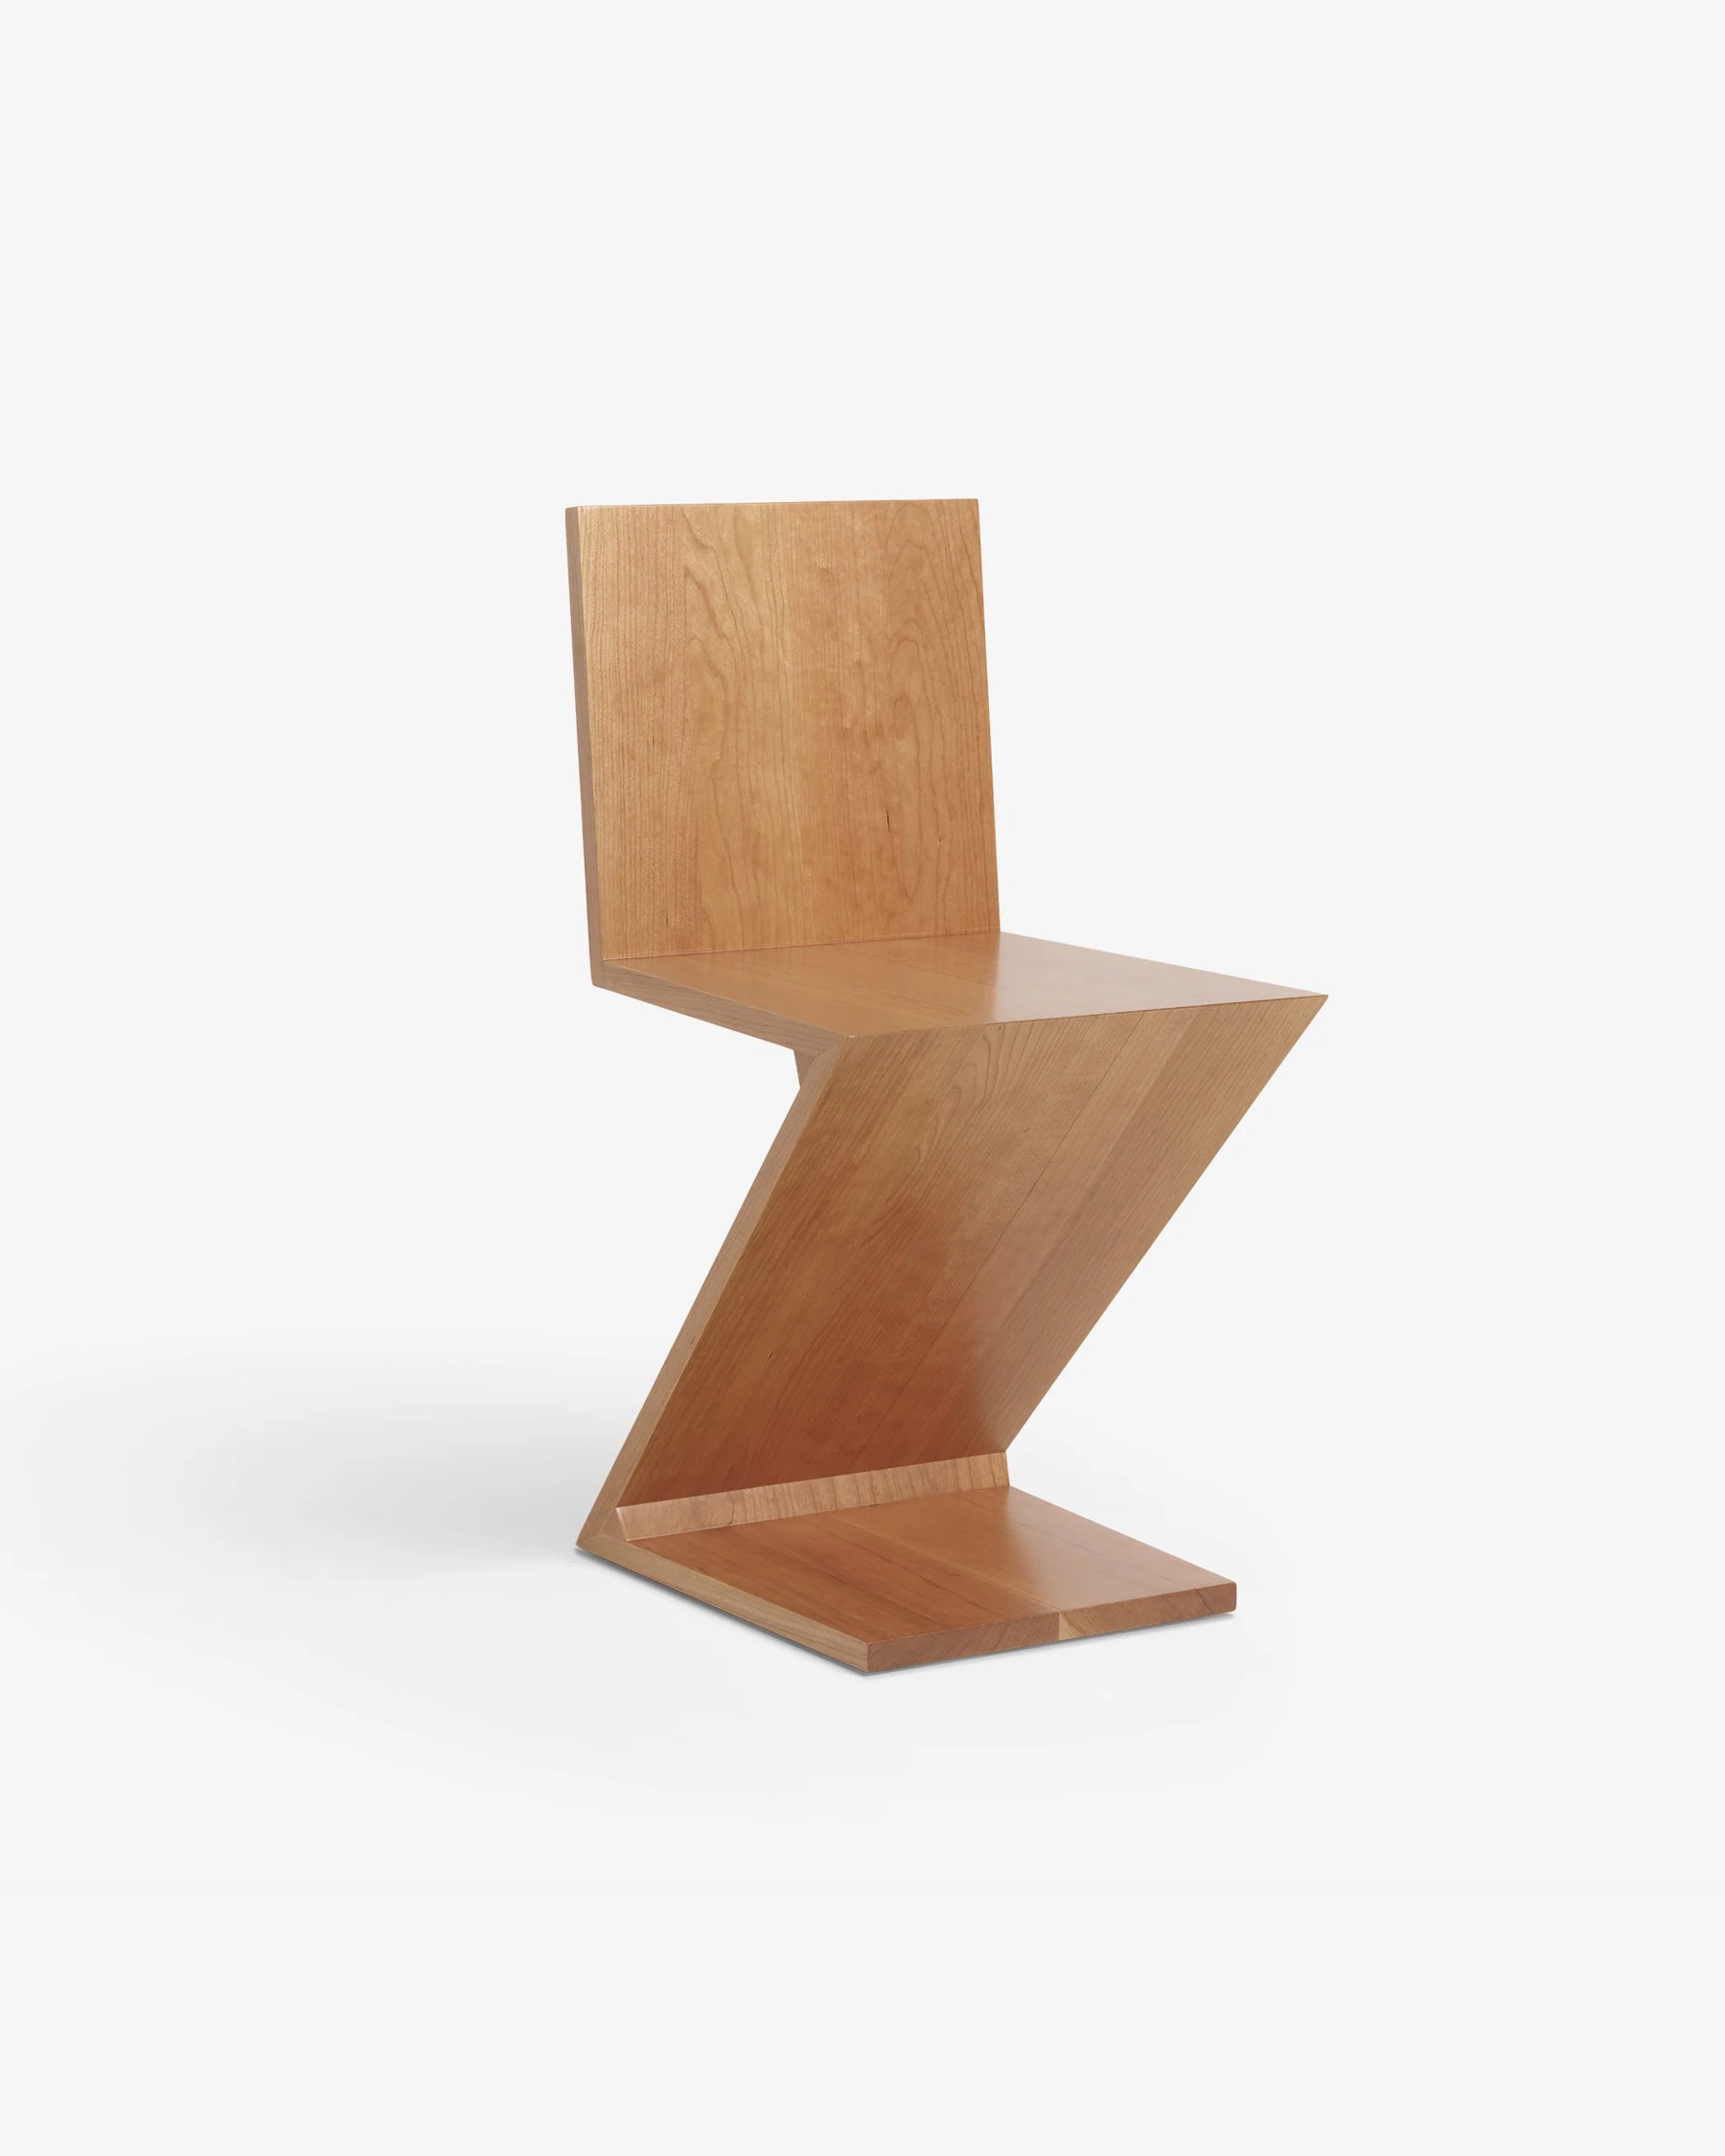 Buy a Crate chair (Rietveld Originals x HAY)?